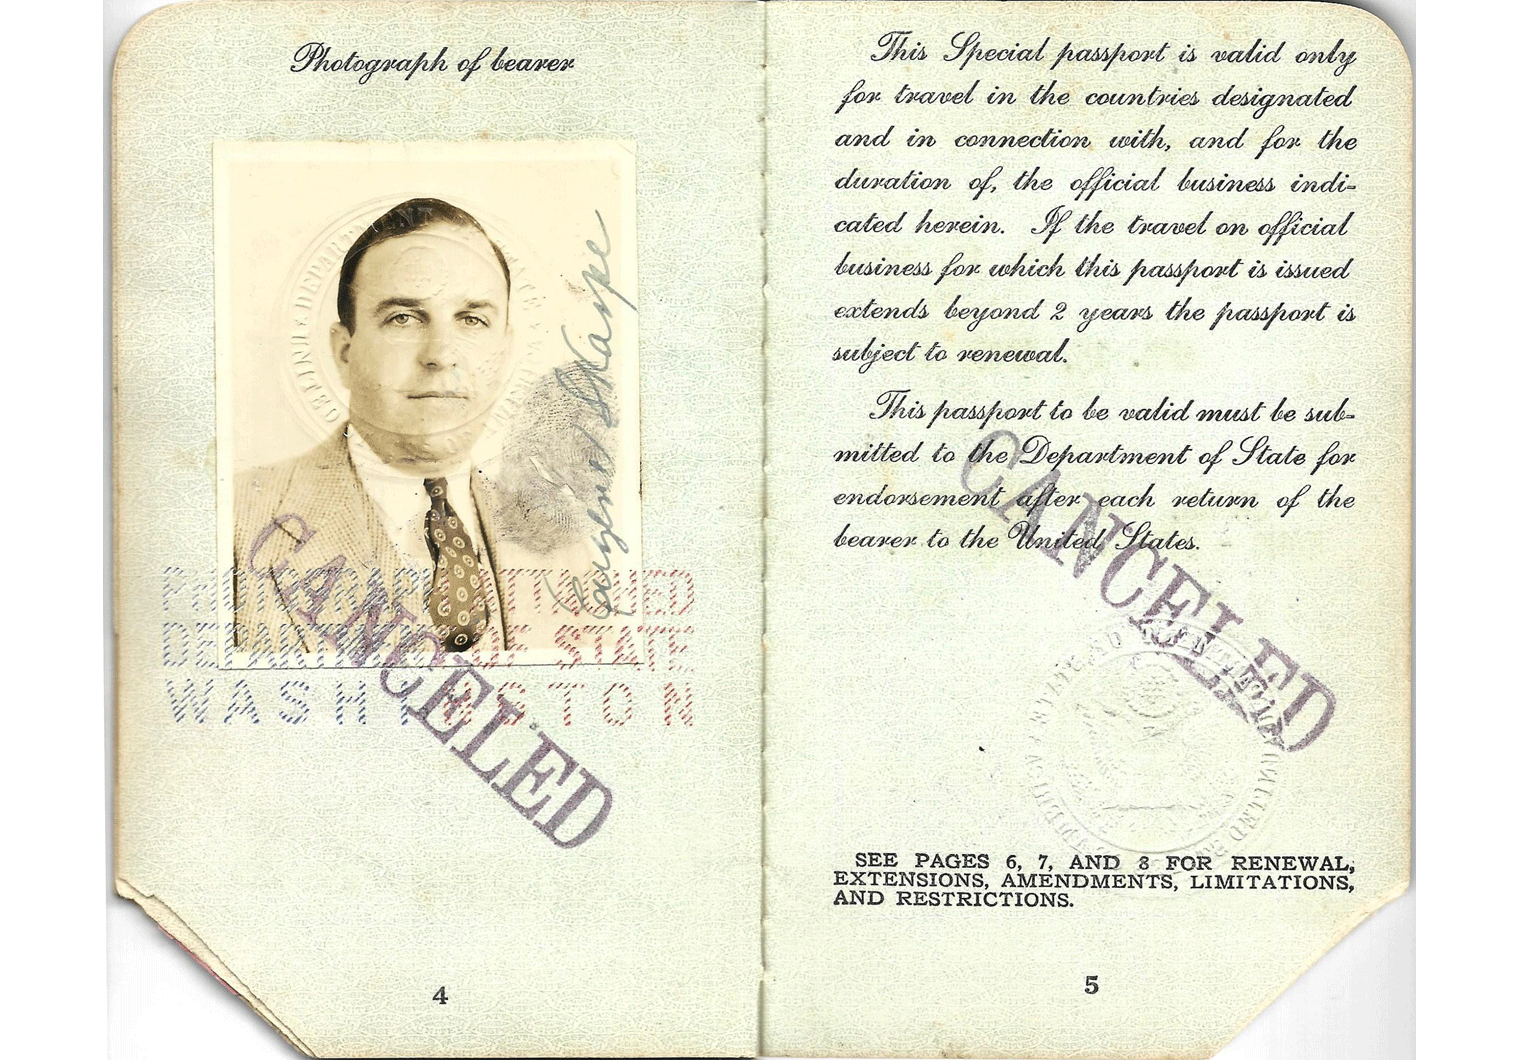 WW2 Special passport for the Pacific